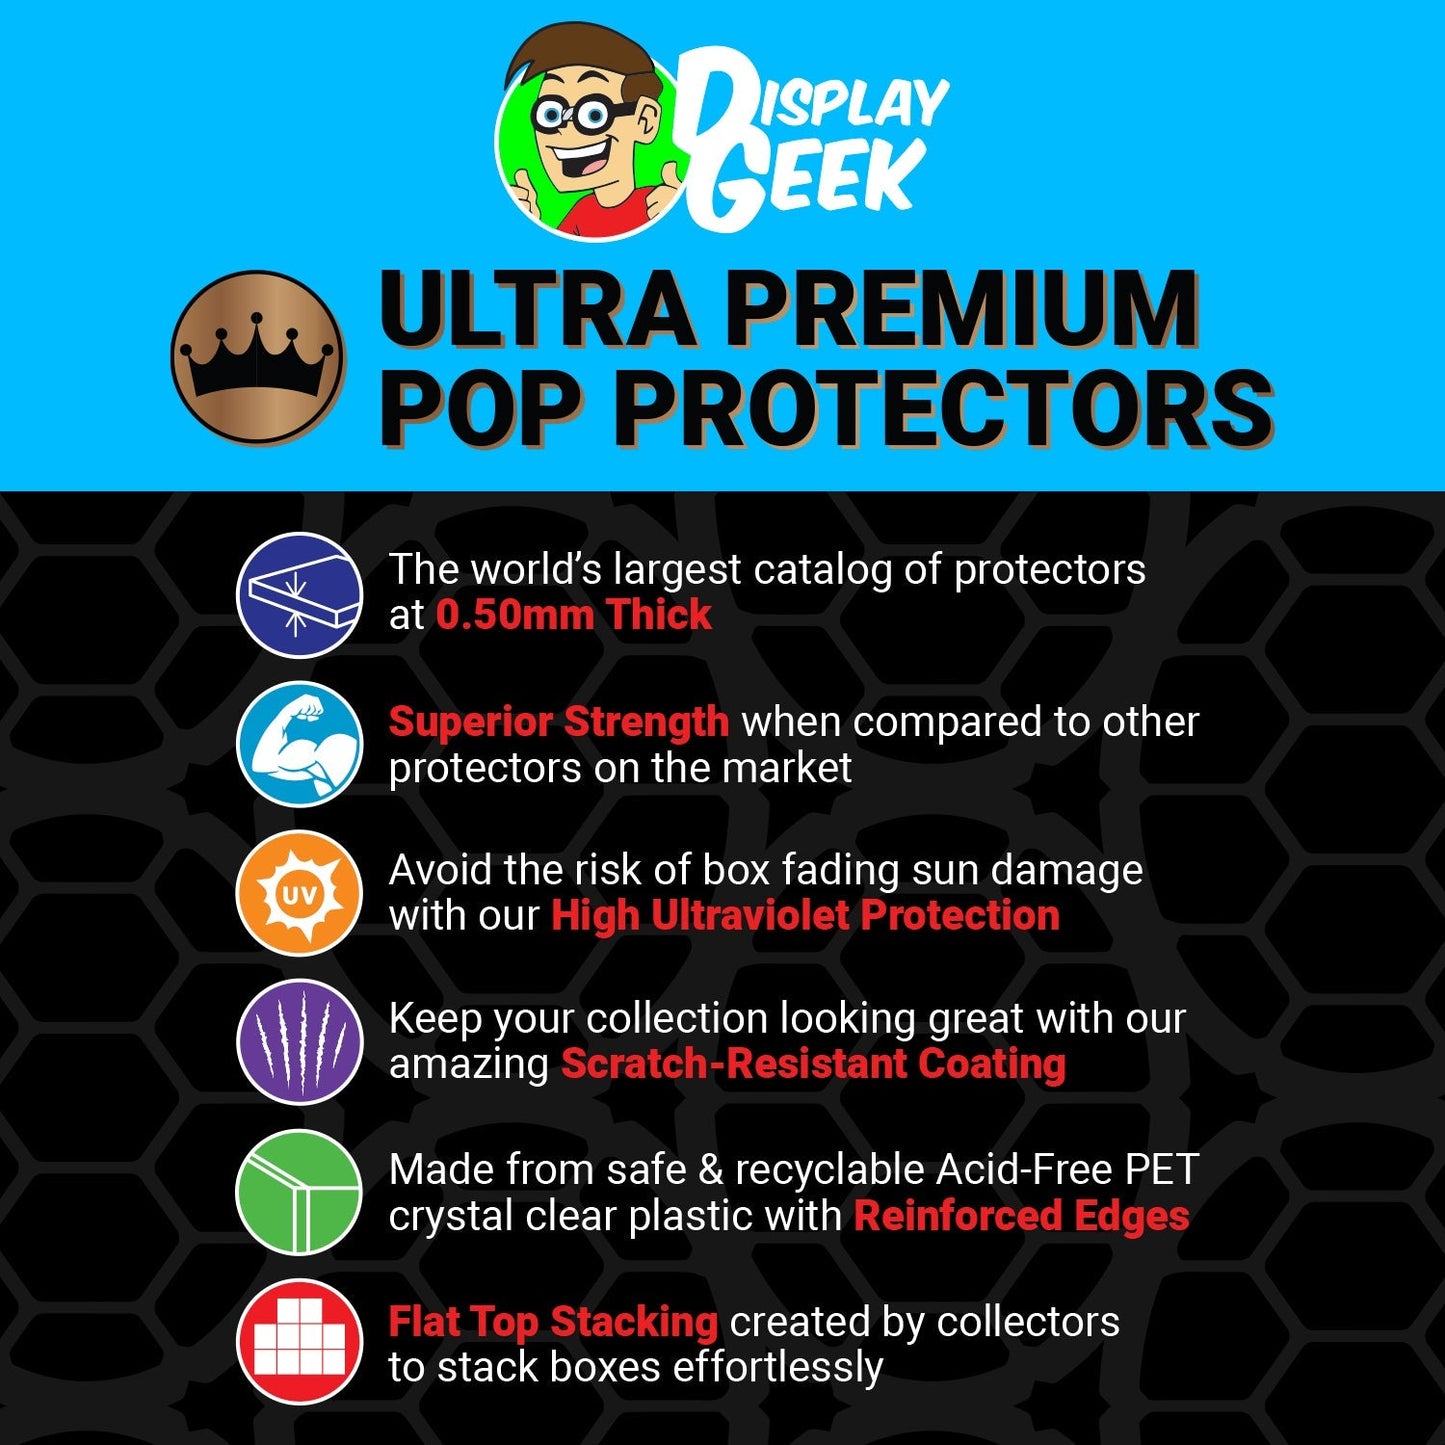 Pop Protector for Kiss the Girl #546 Funko Pop Movie Moments - PPG Pop Protector Guide Search Created by Display Geek